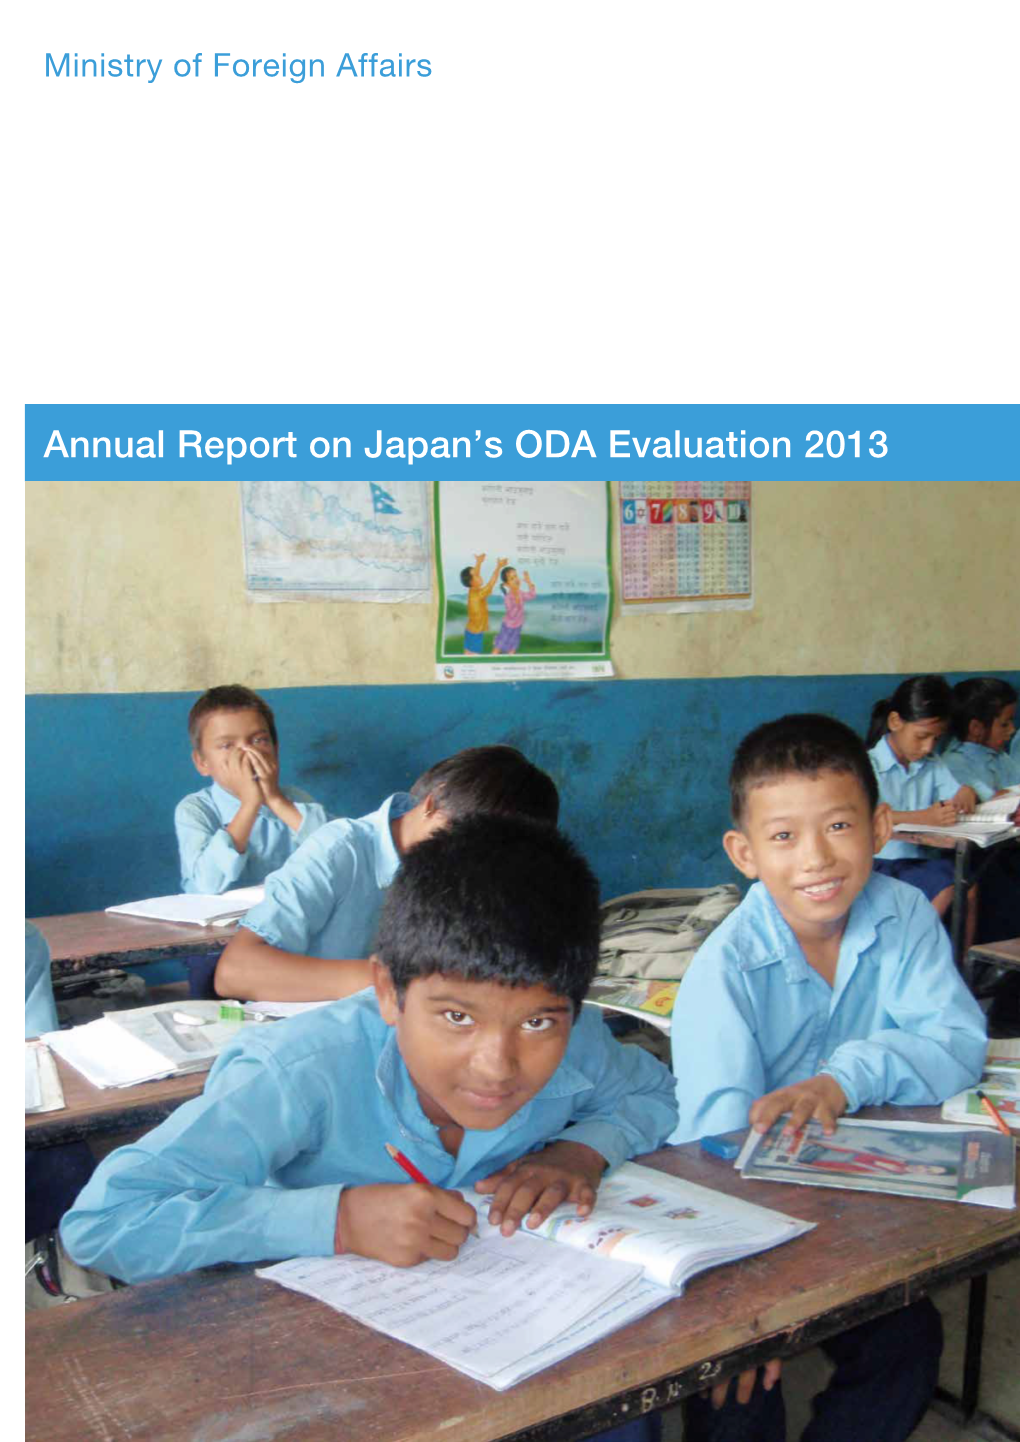 Annual Report on Japan's ODA Evaluation 2013